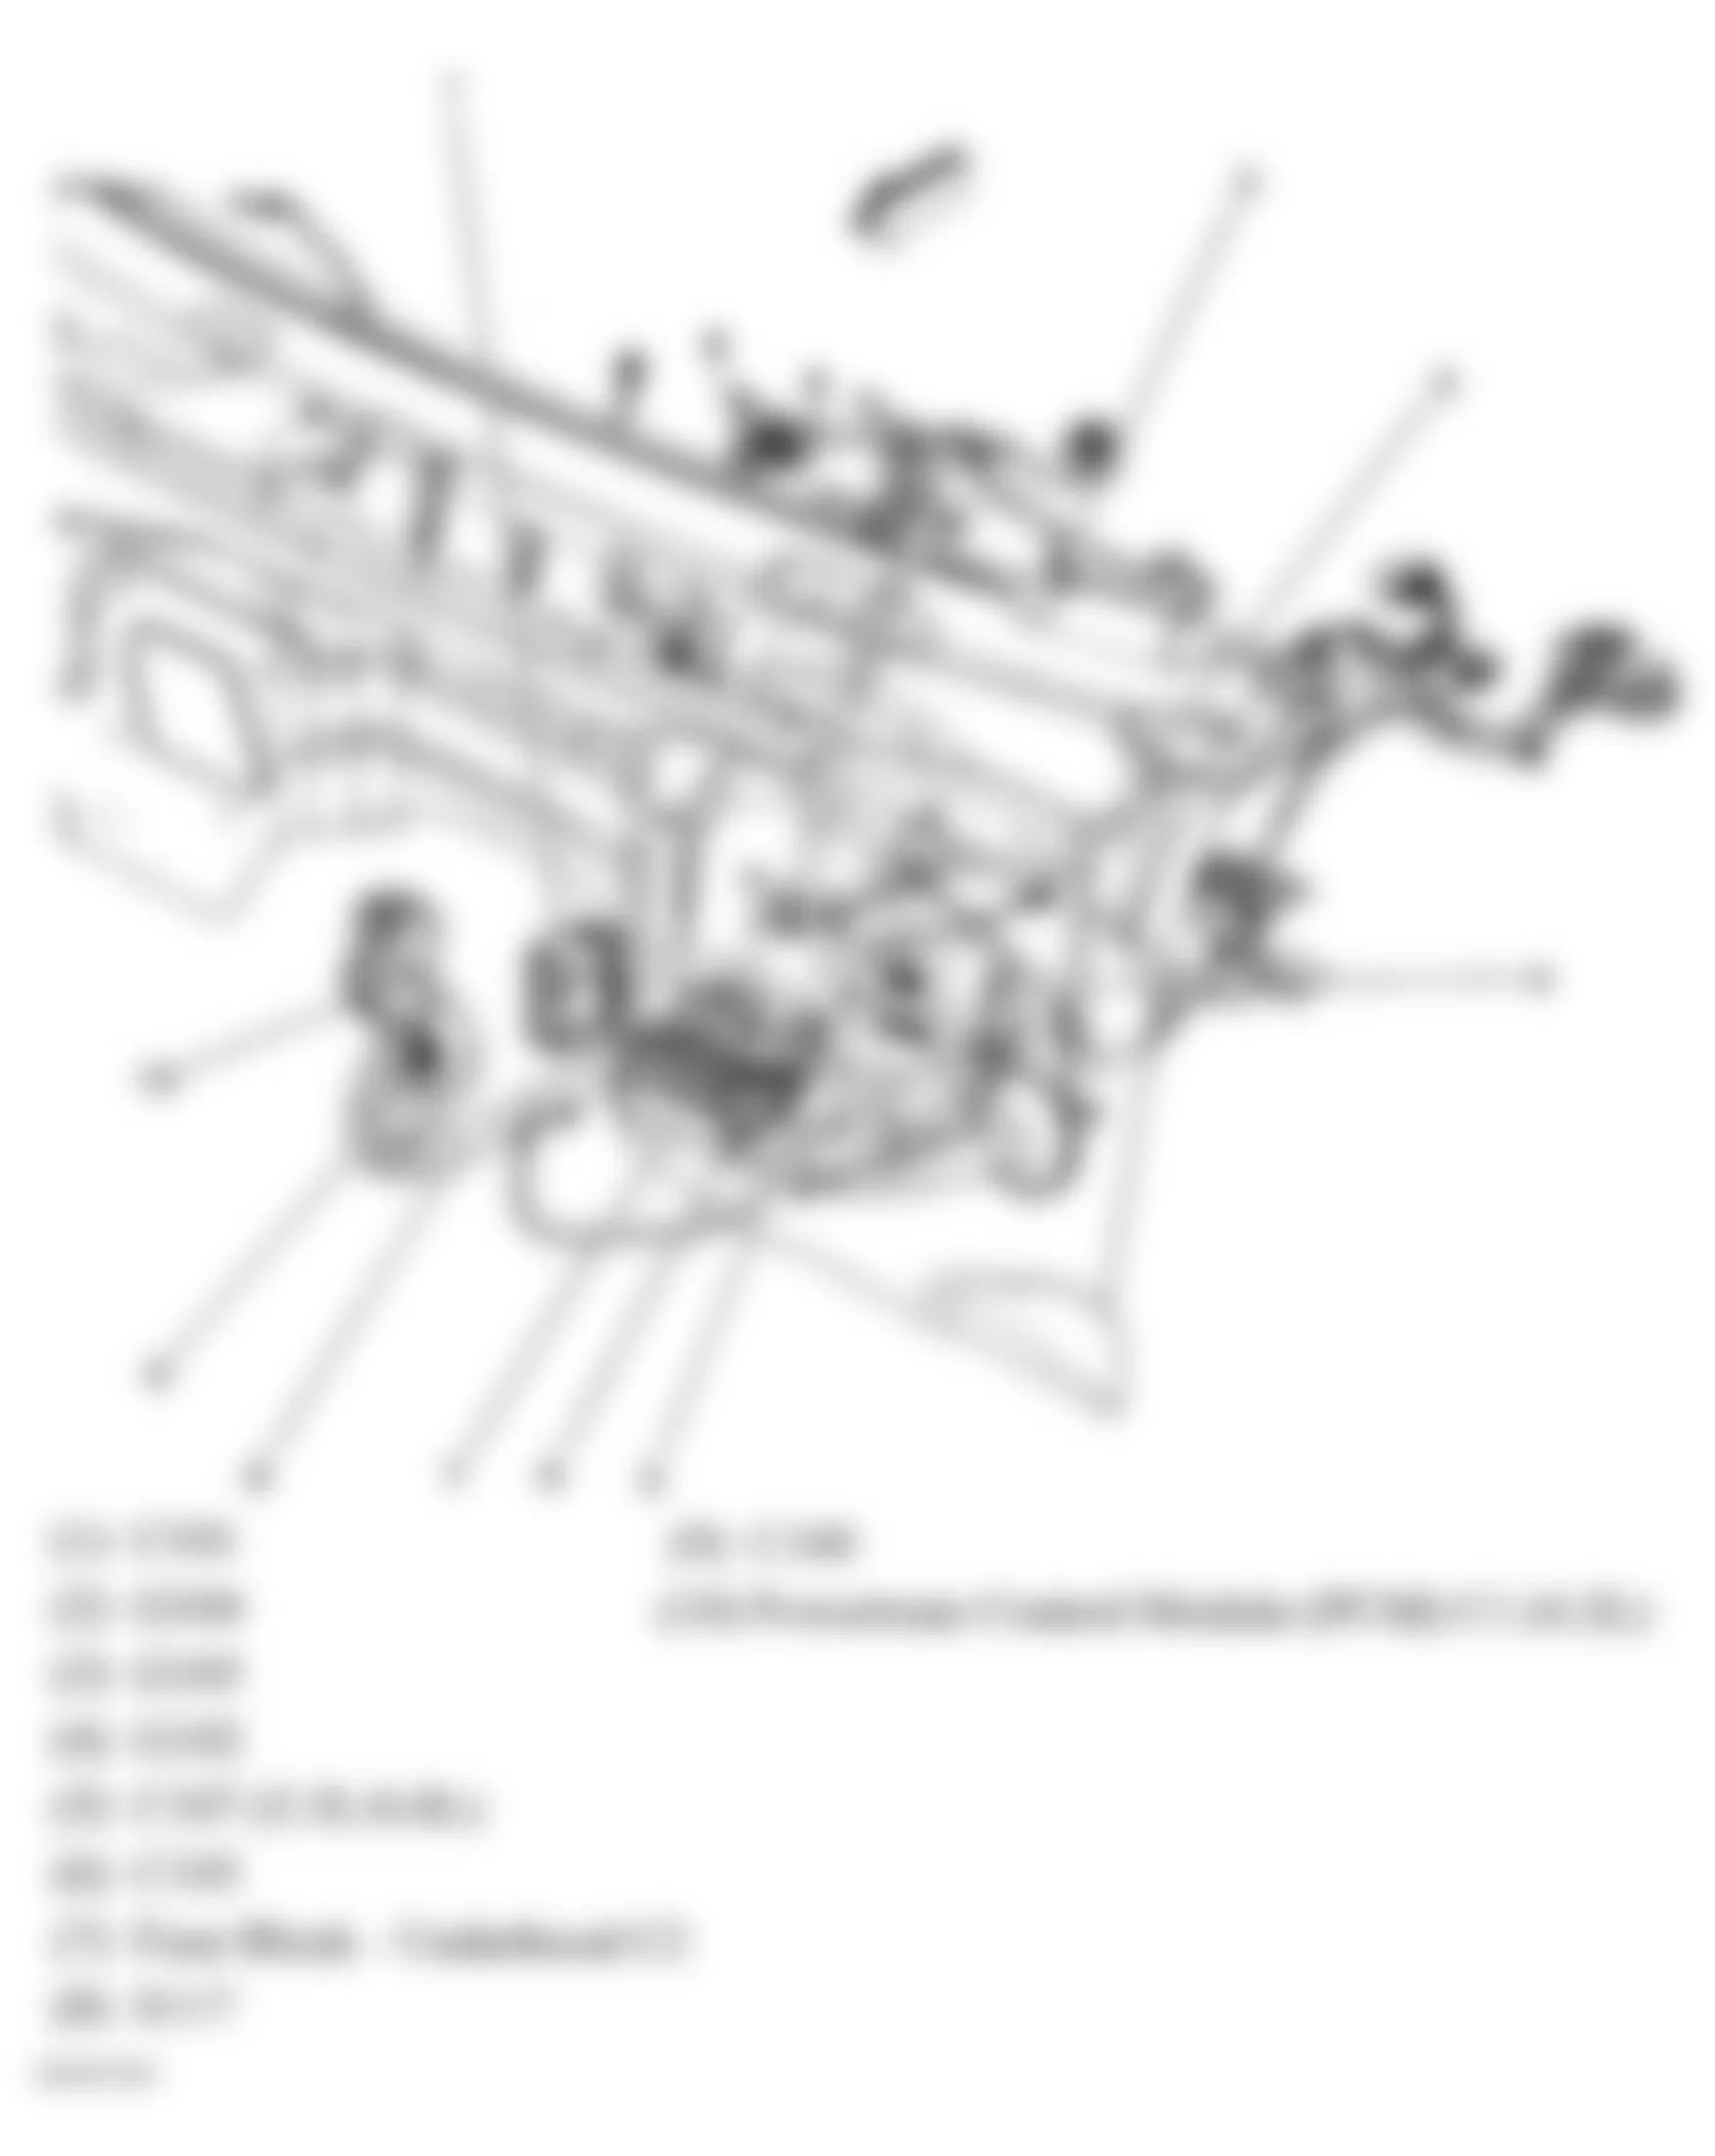 GMC Envoy XL 2006 - Component Locations -  Rear Of Engine Compartment